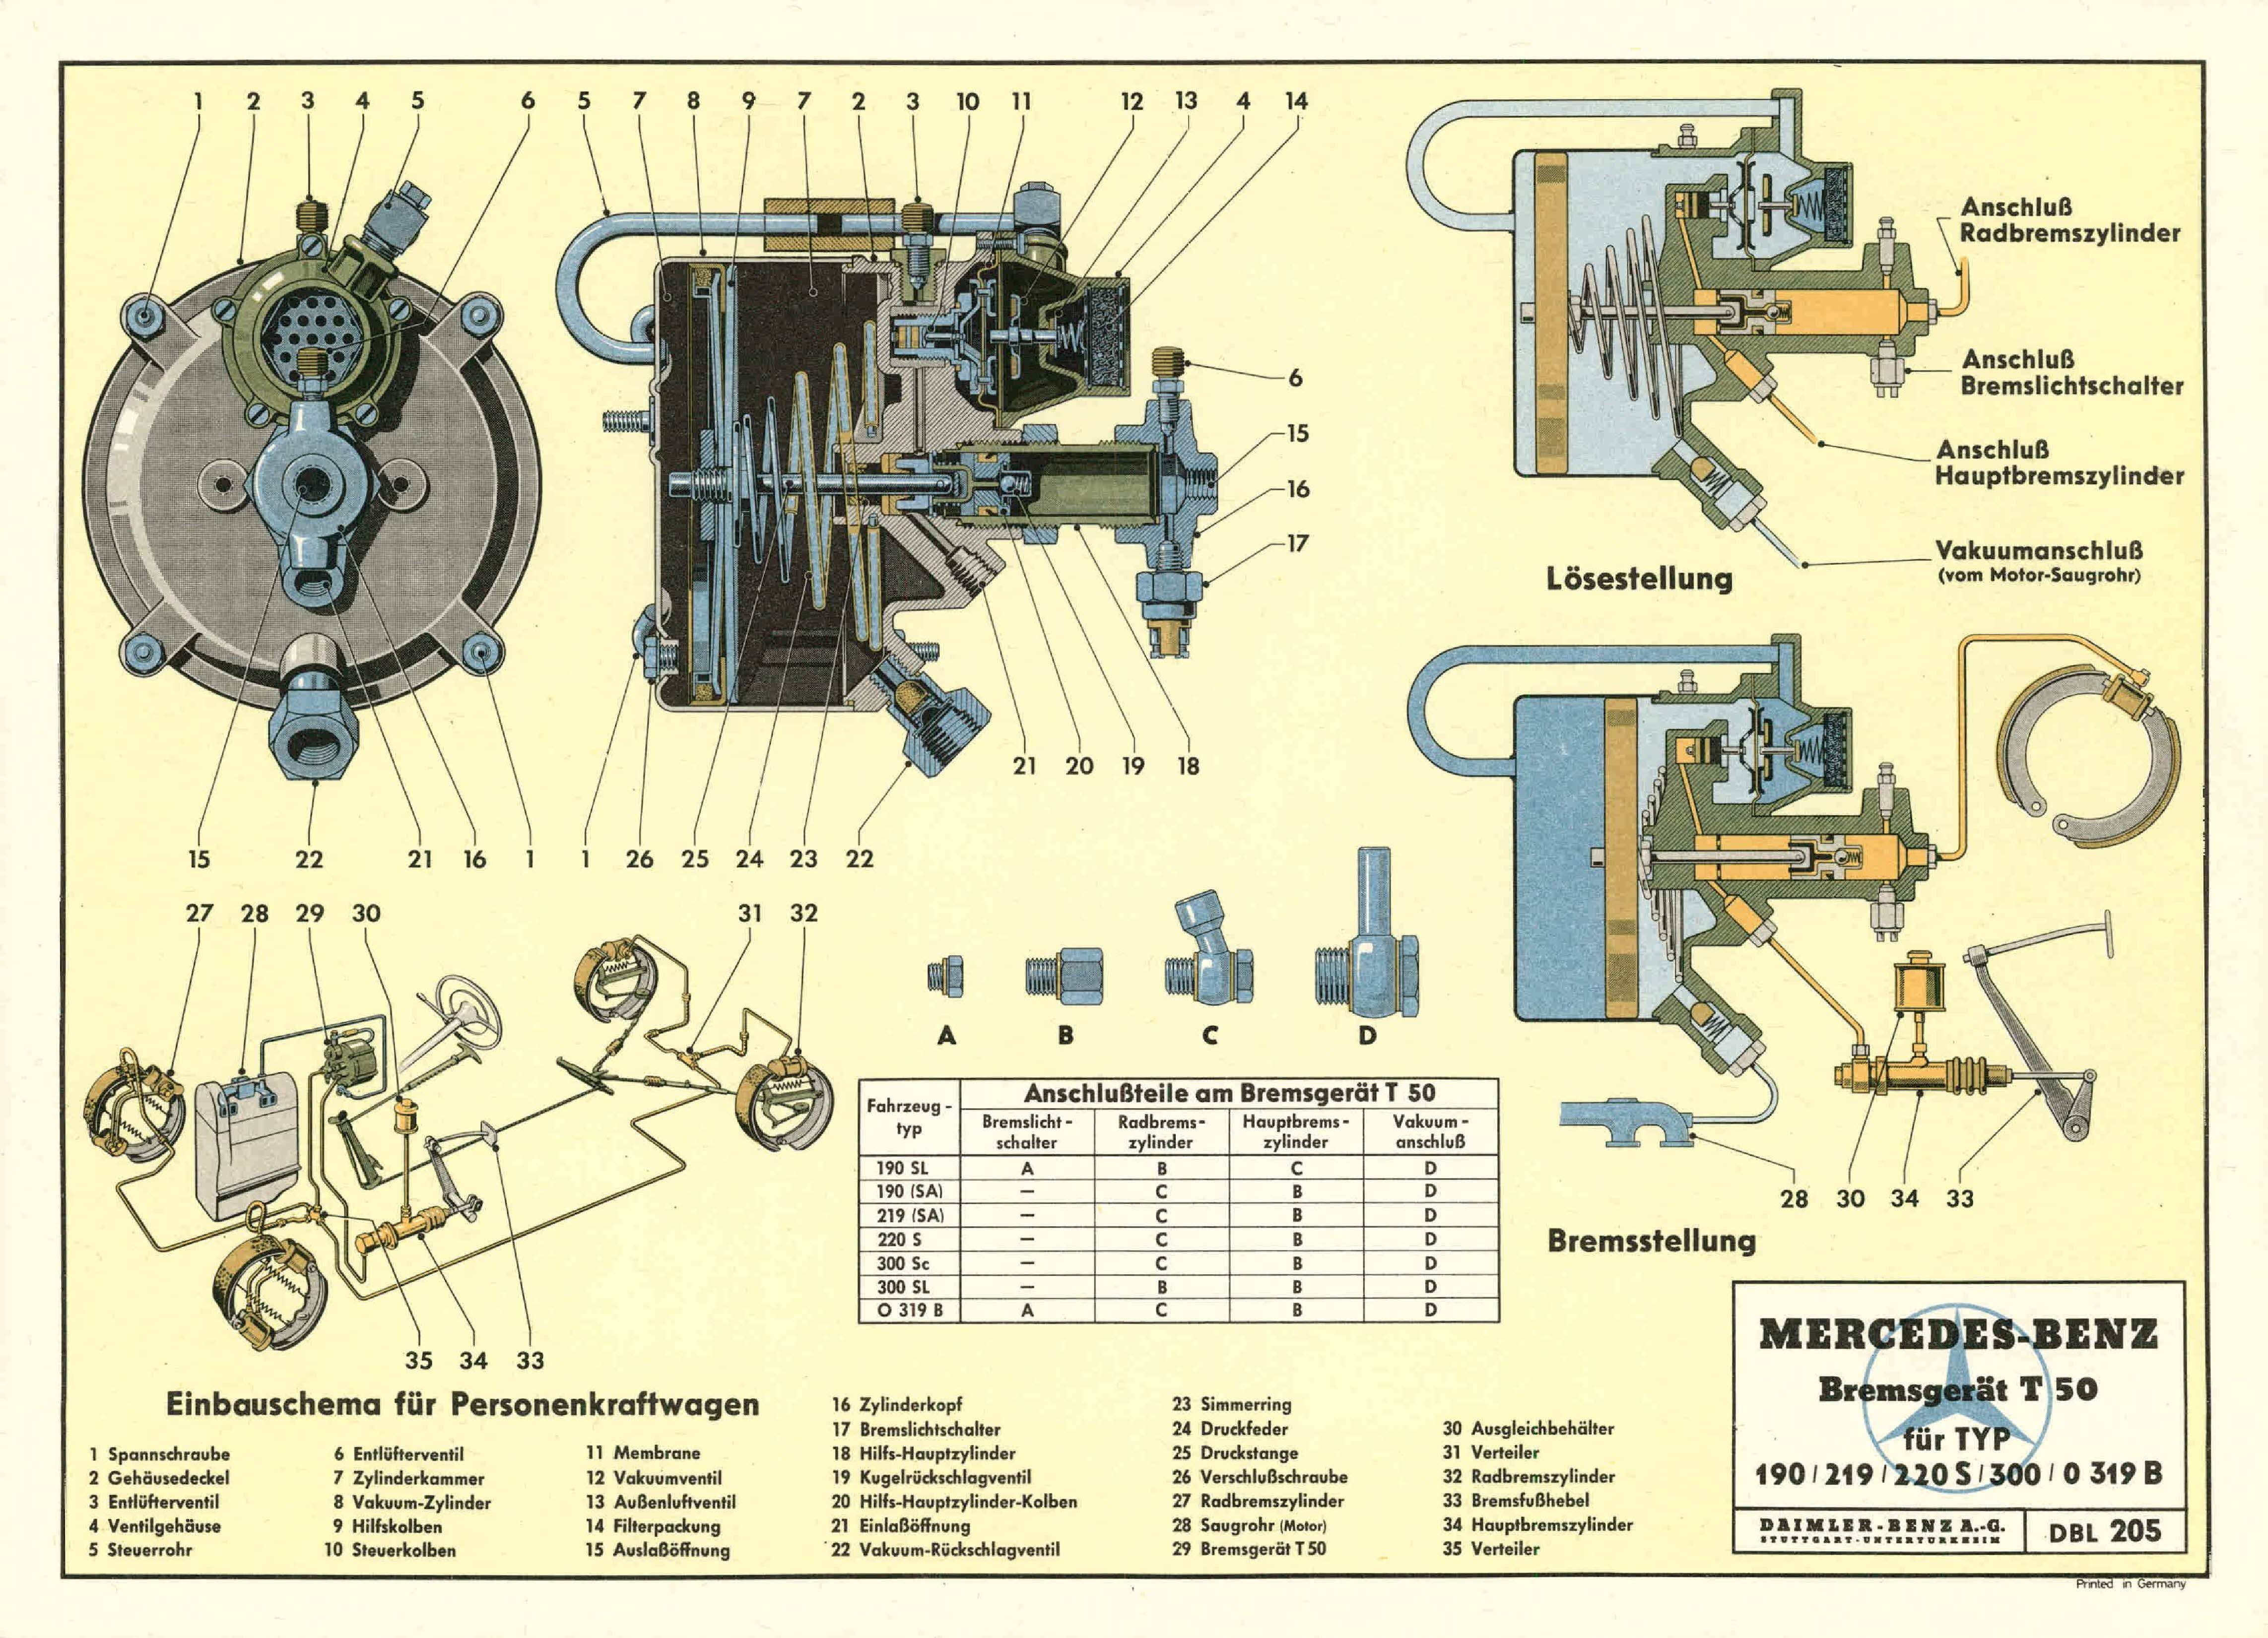 Brake Booster Diagram Dave S Place Hydro Vac Info | My Wiring DIagram